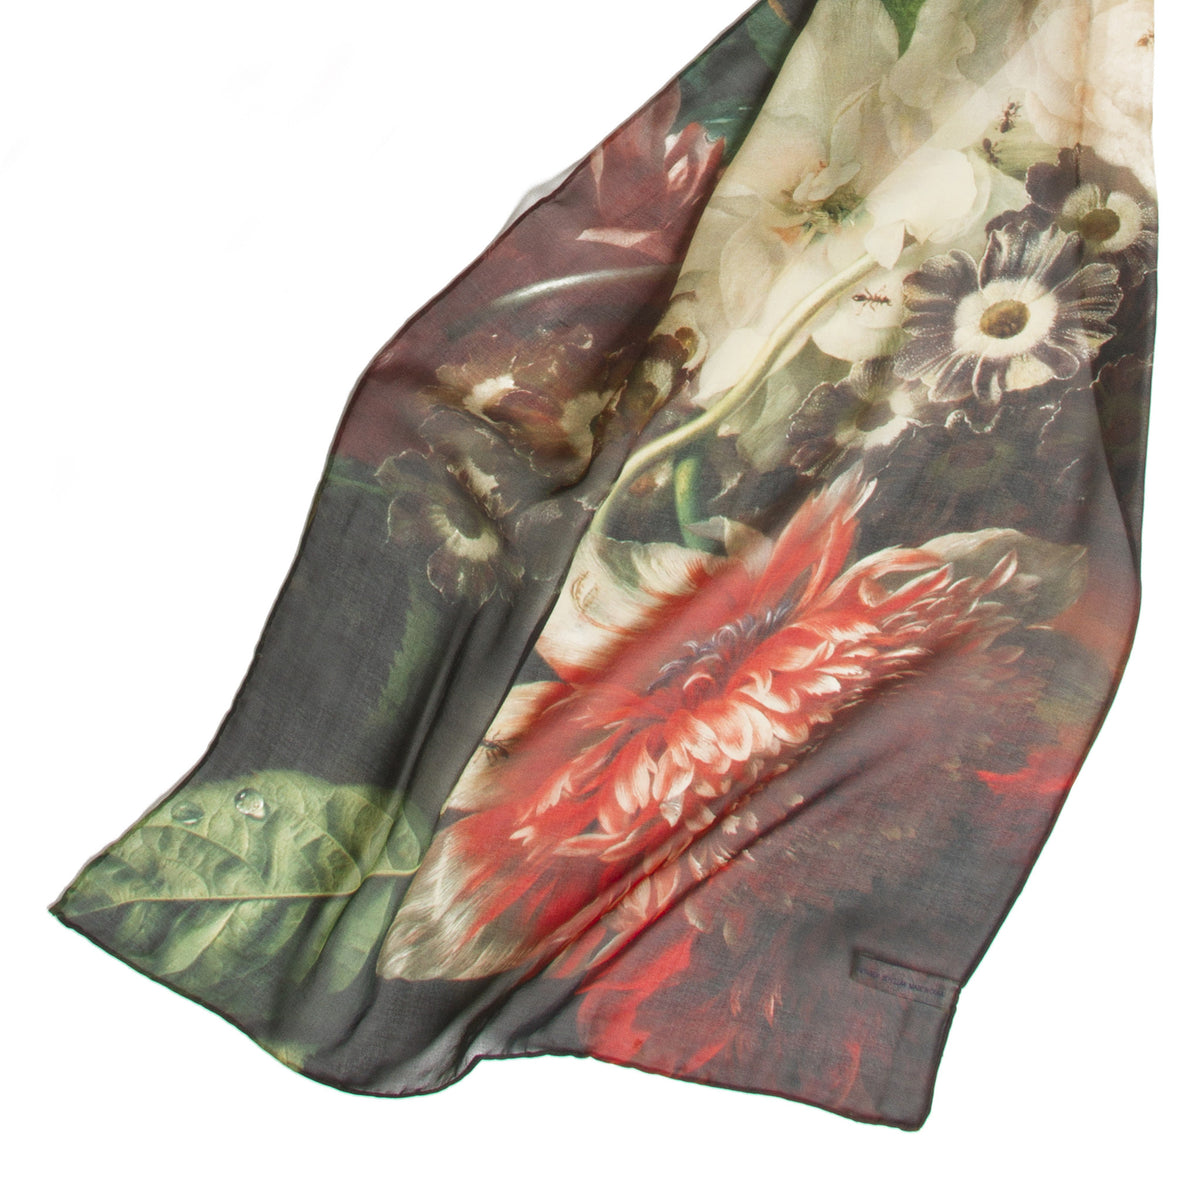 Vase of Flowers Silk Scarf detail of sheerness | Getty Store